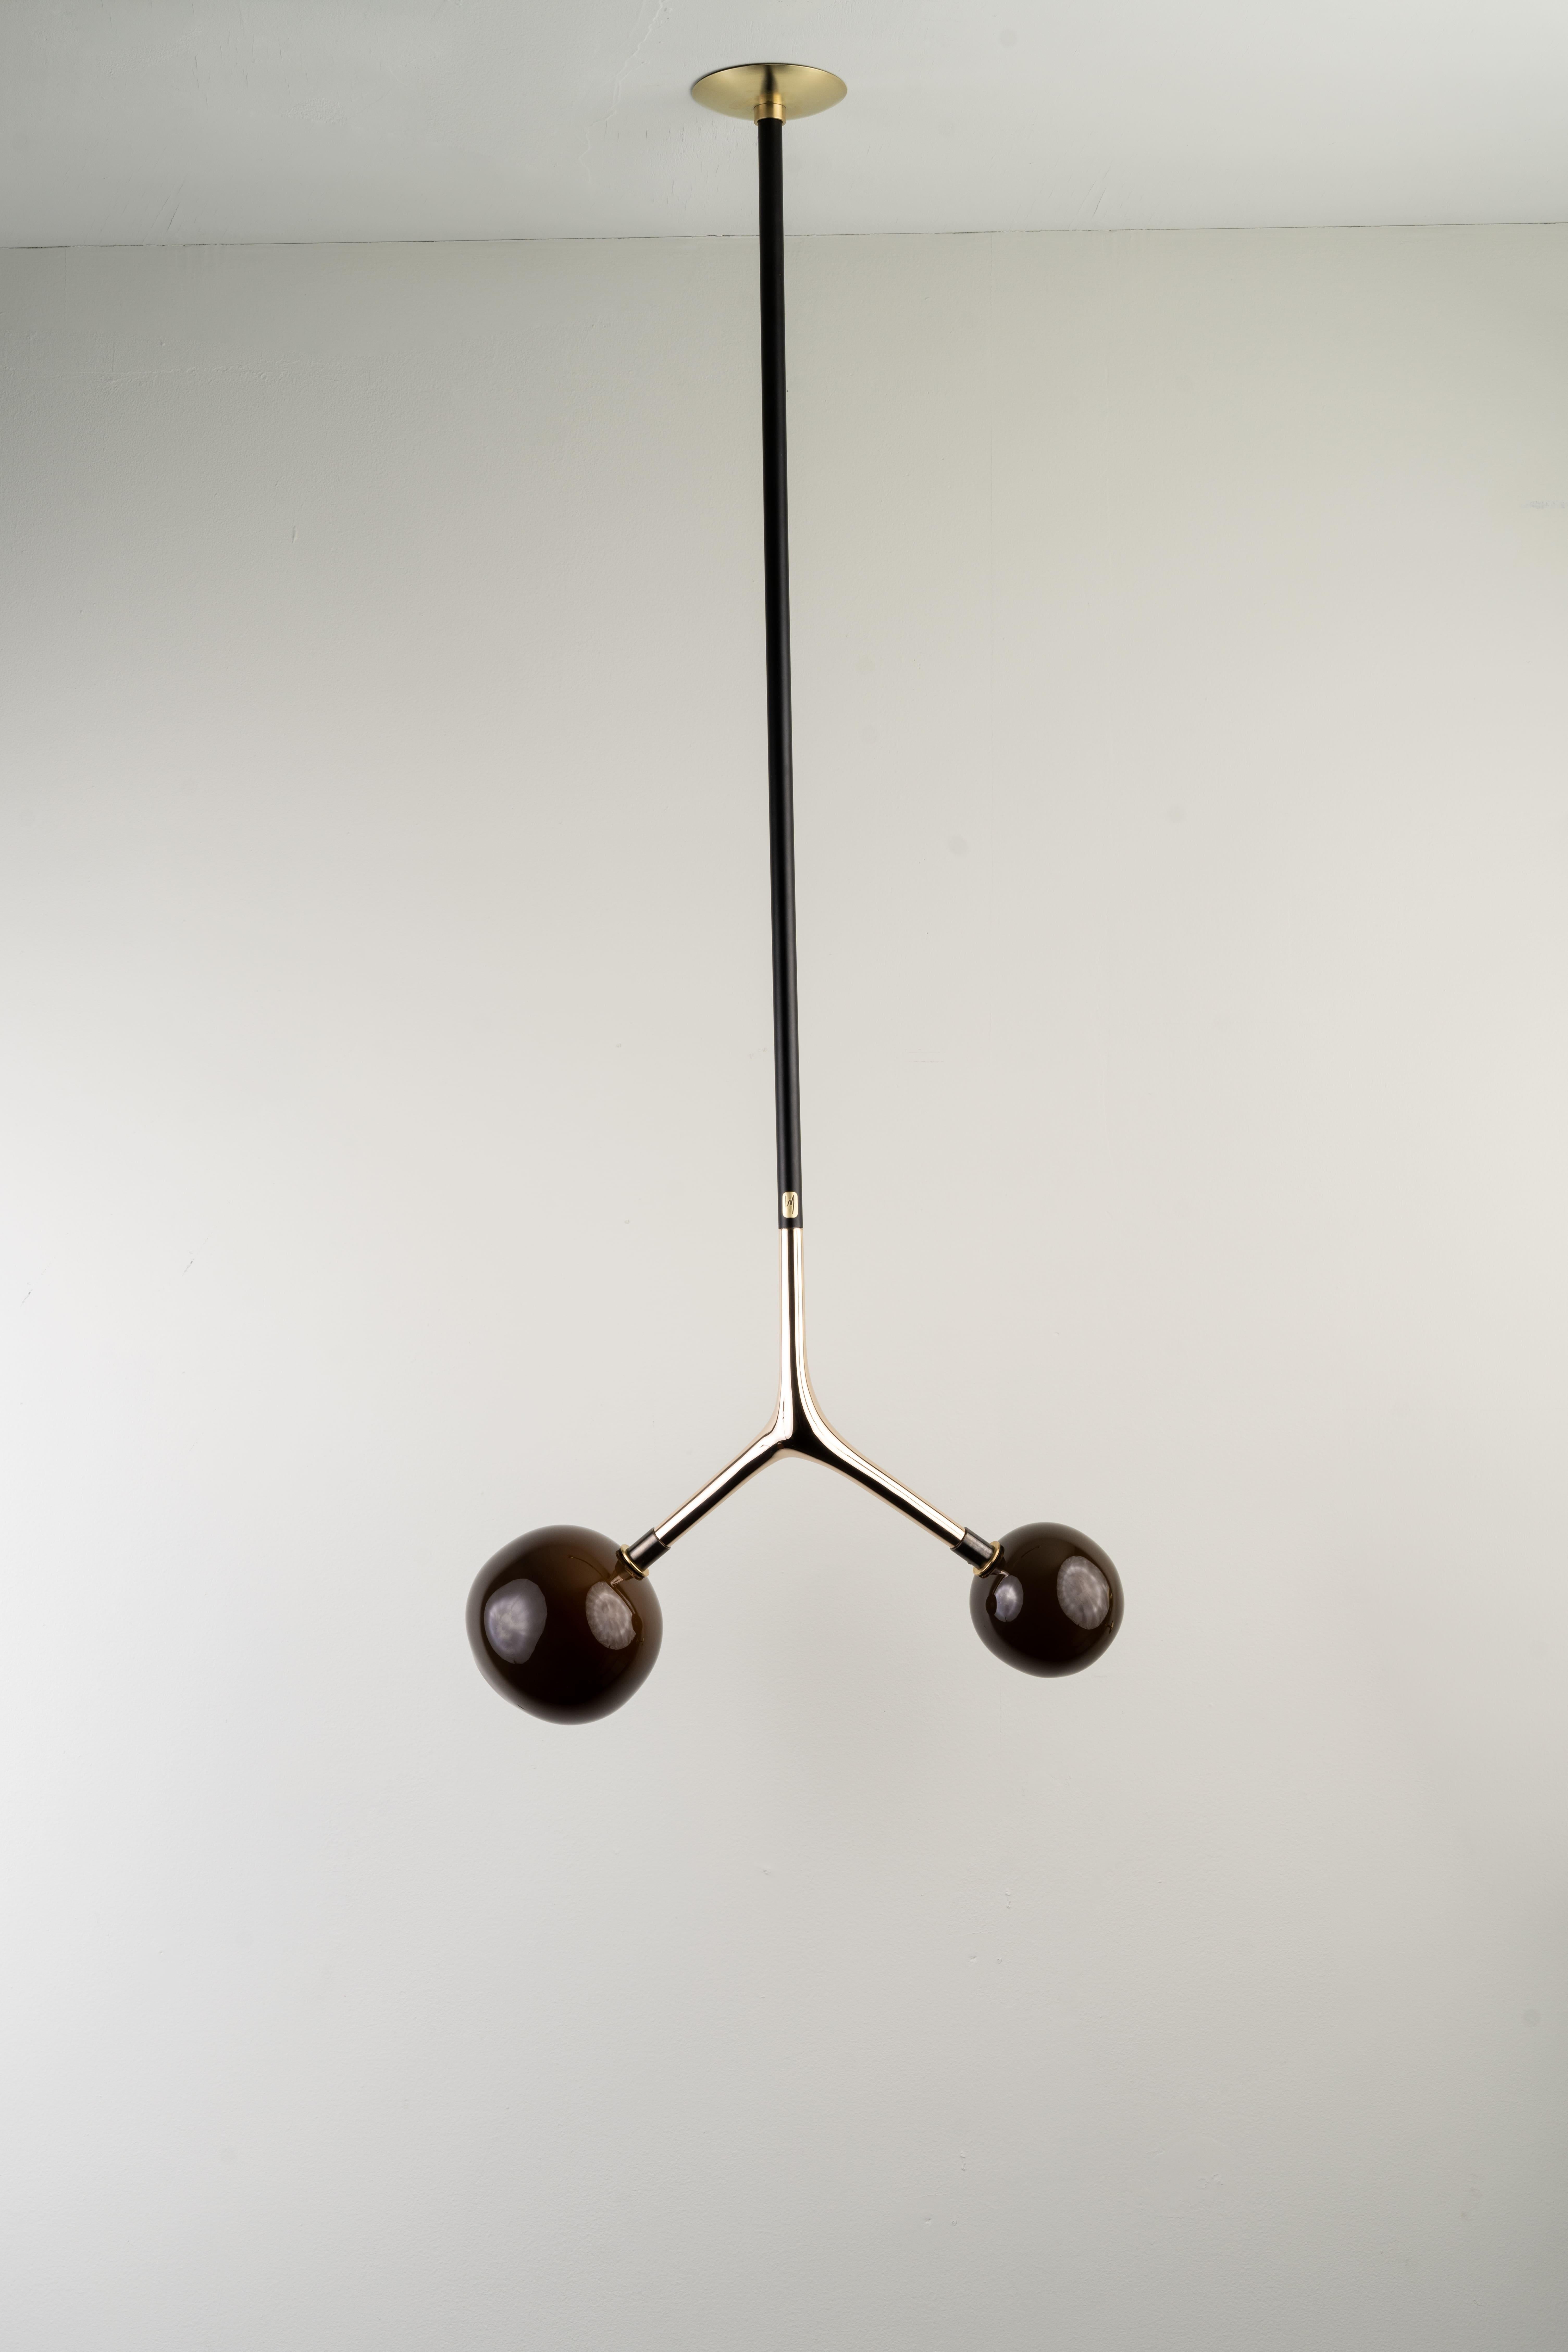 Powder-Coated Organic Modern Hanging Light Lost-Wax Bronze Blown Glass Globes For Sale